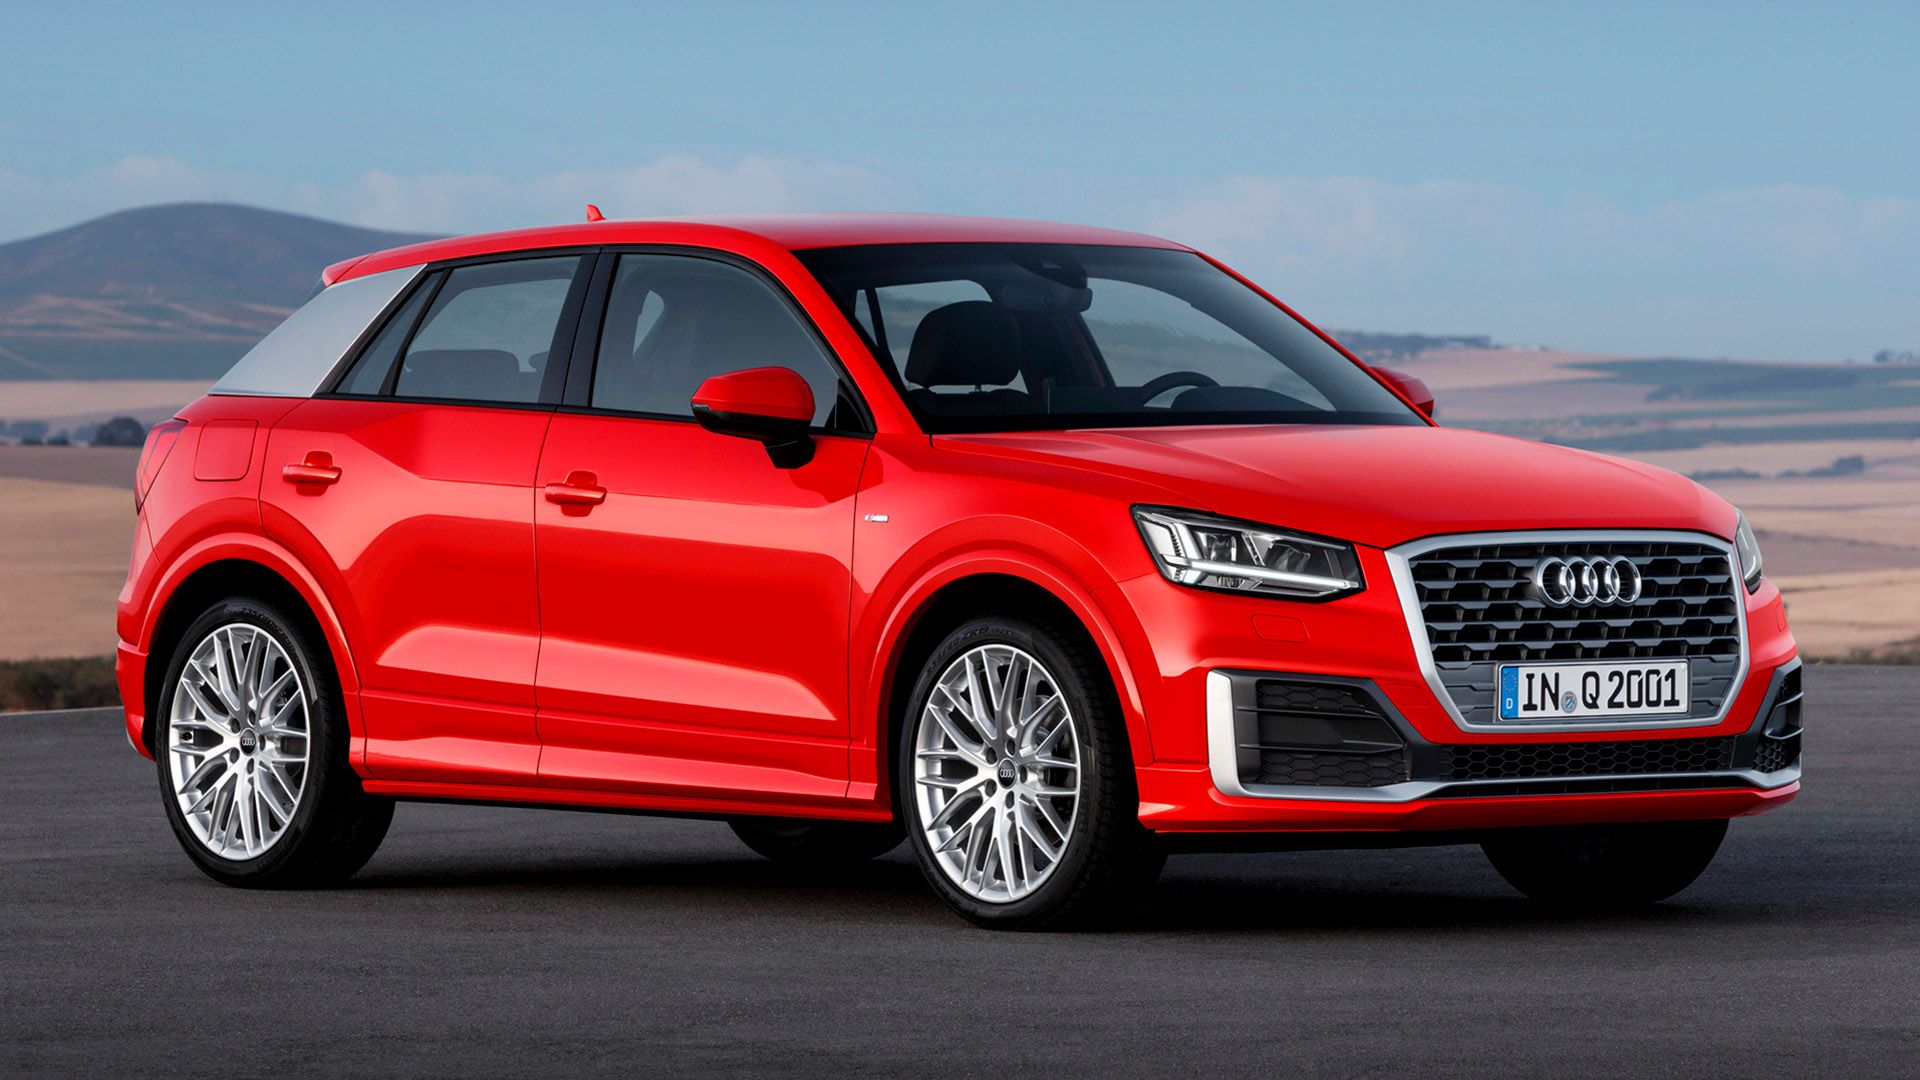 Red Audi Q2 in front of a mountain range